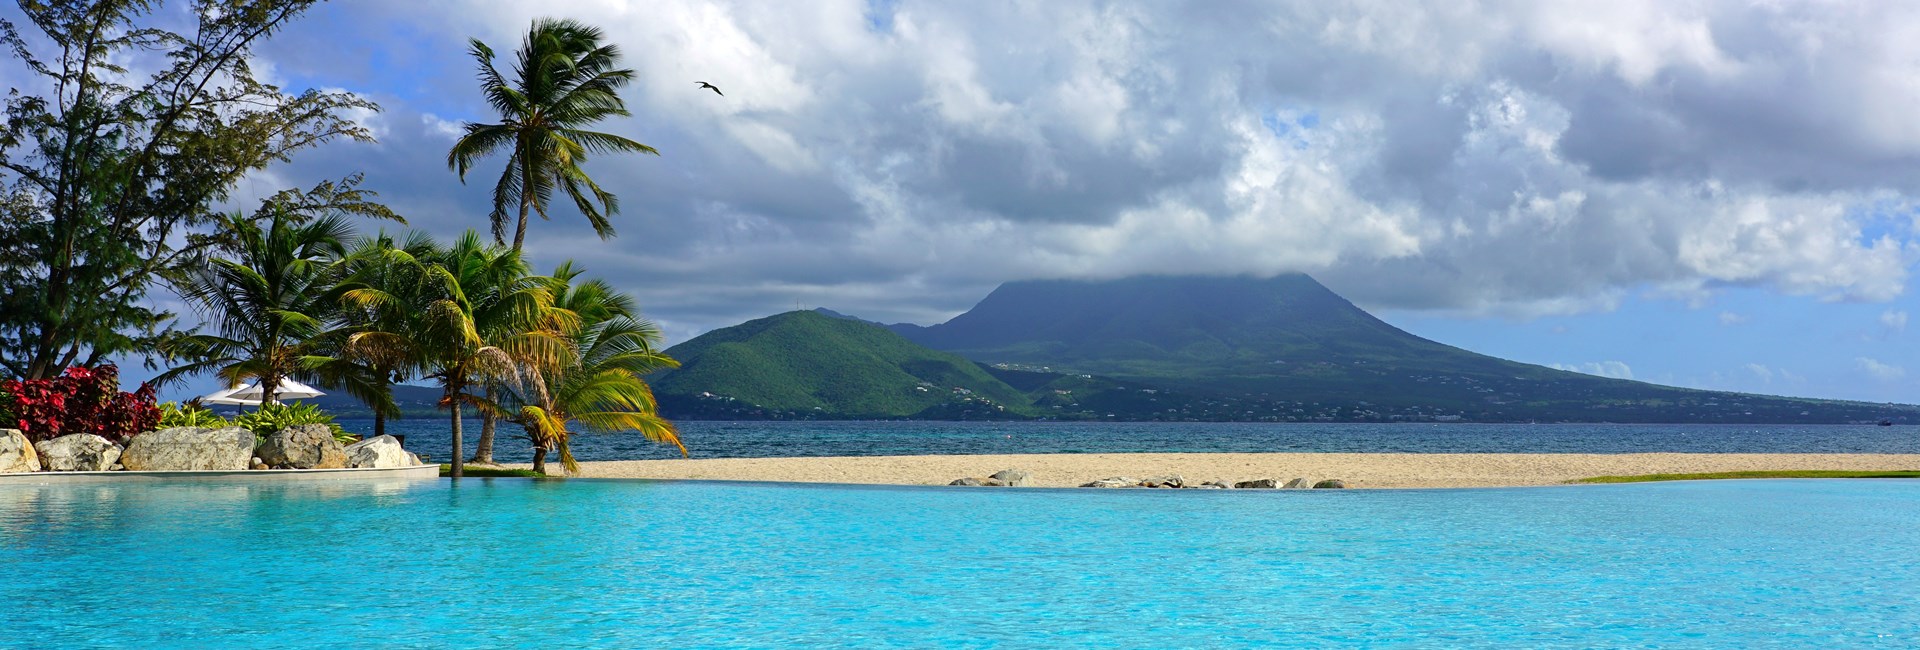 View of Nevis peak across the water from St. Kitts